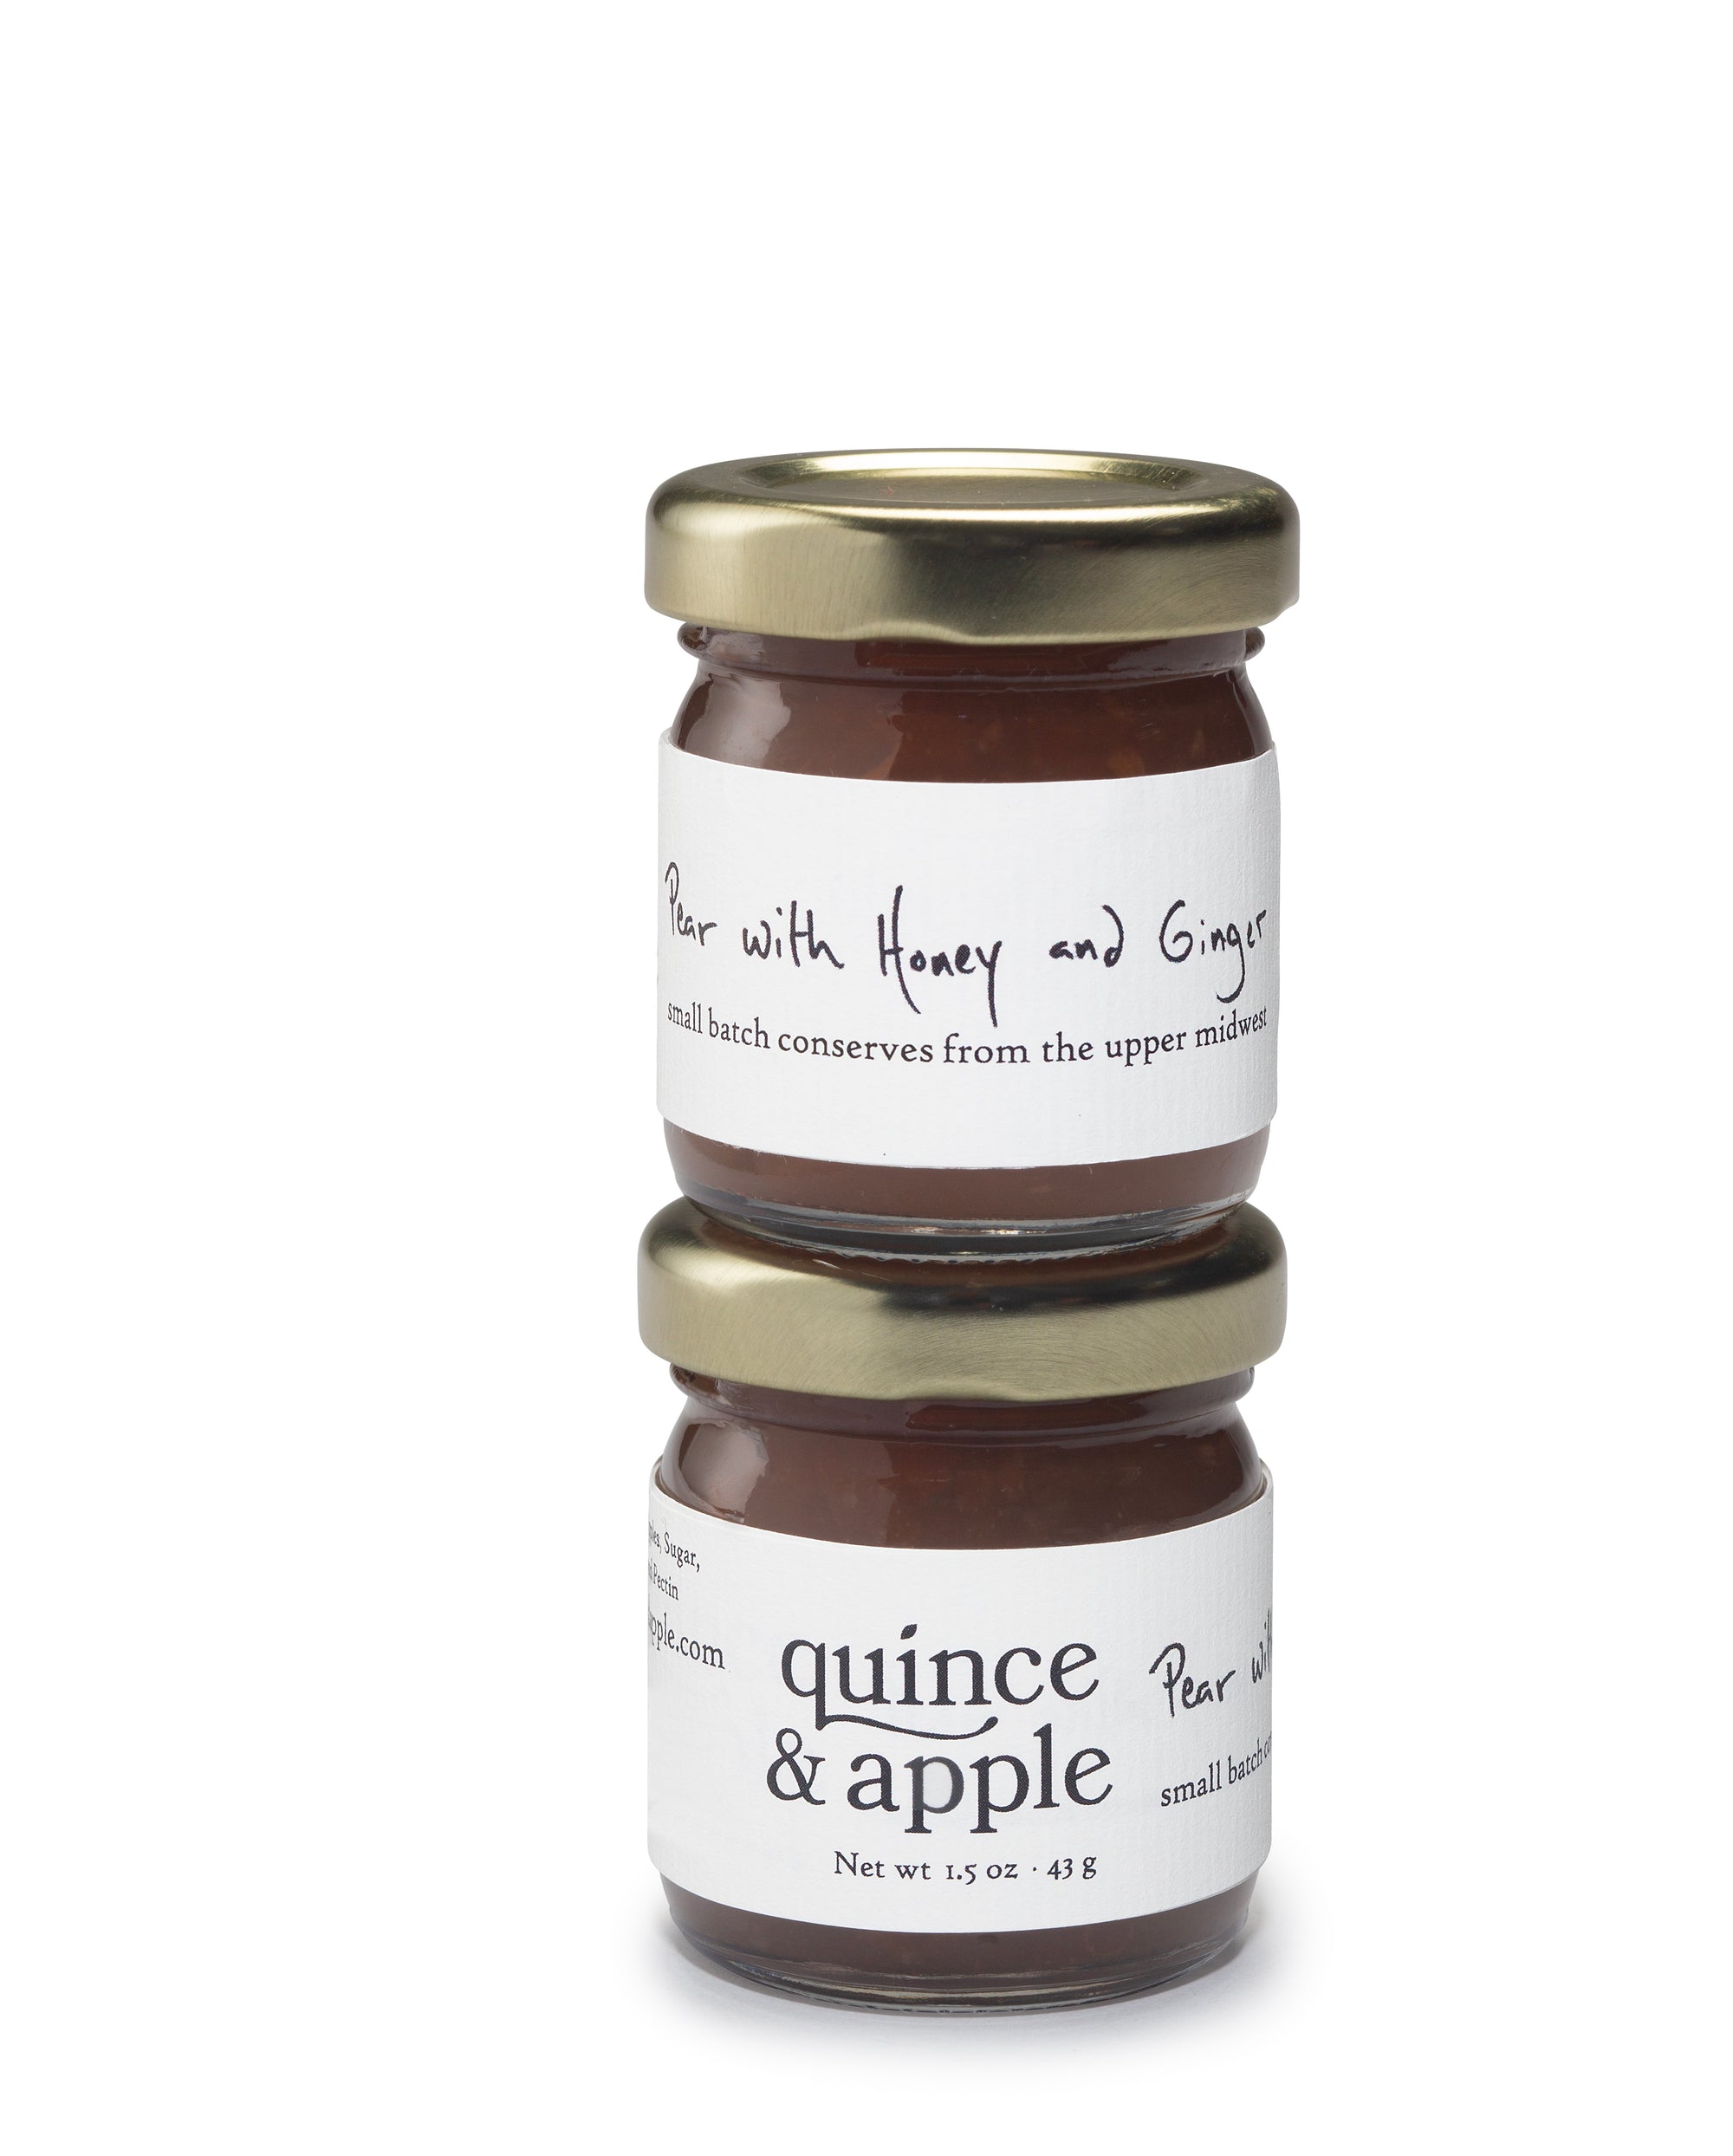 Pear with Honey and Ginger - Case of 12 - 1.5 oz Jars